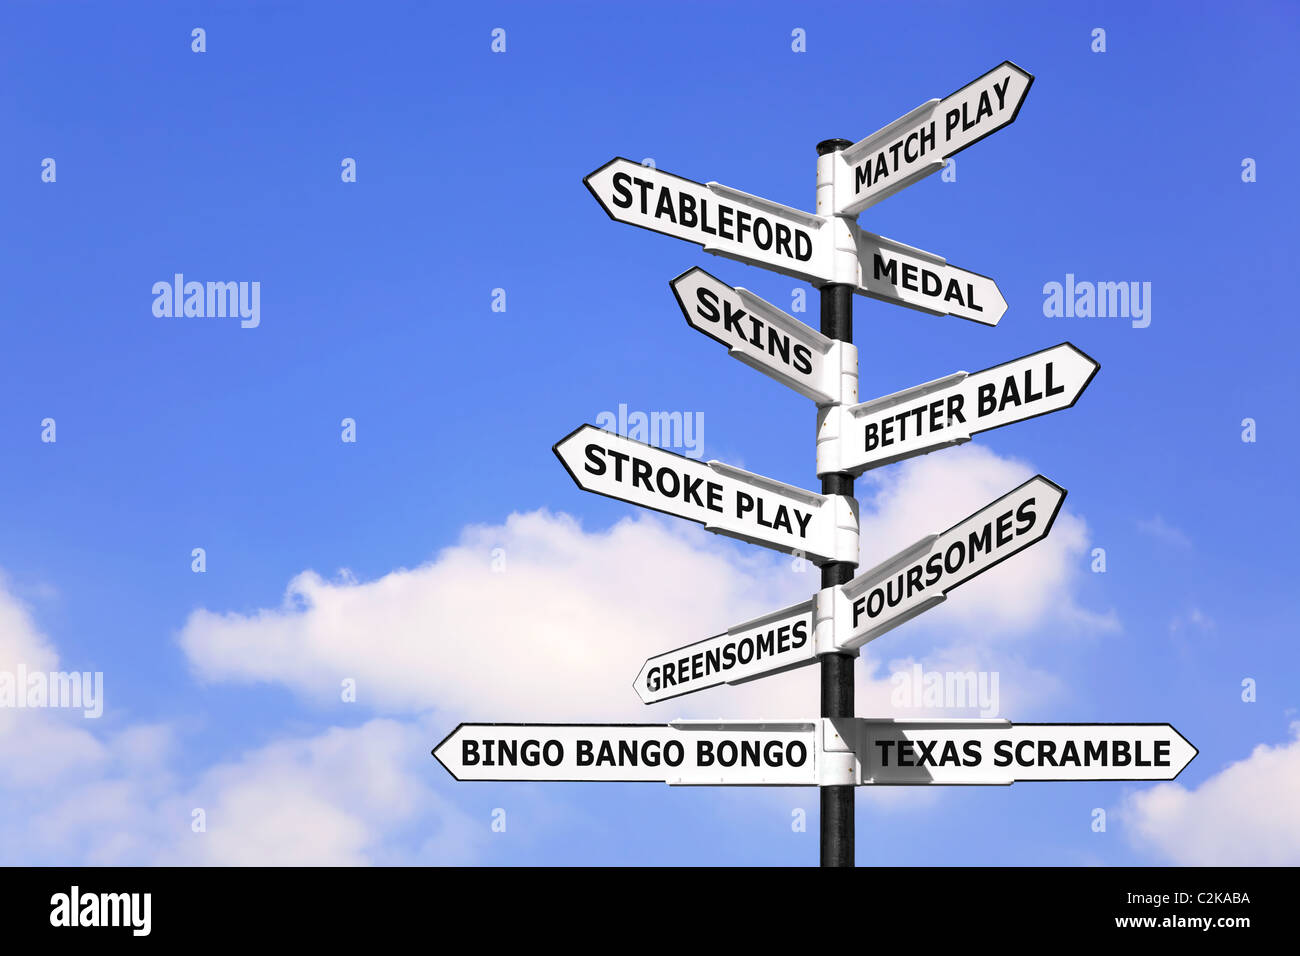 Concept image of a signpost with types of golf competition on the arrows. Stock Photo